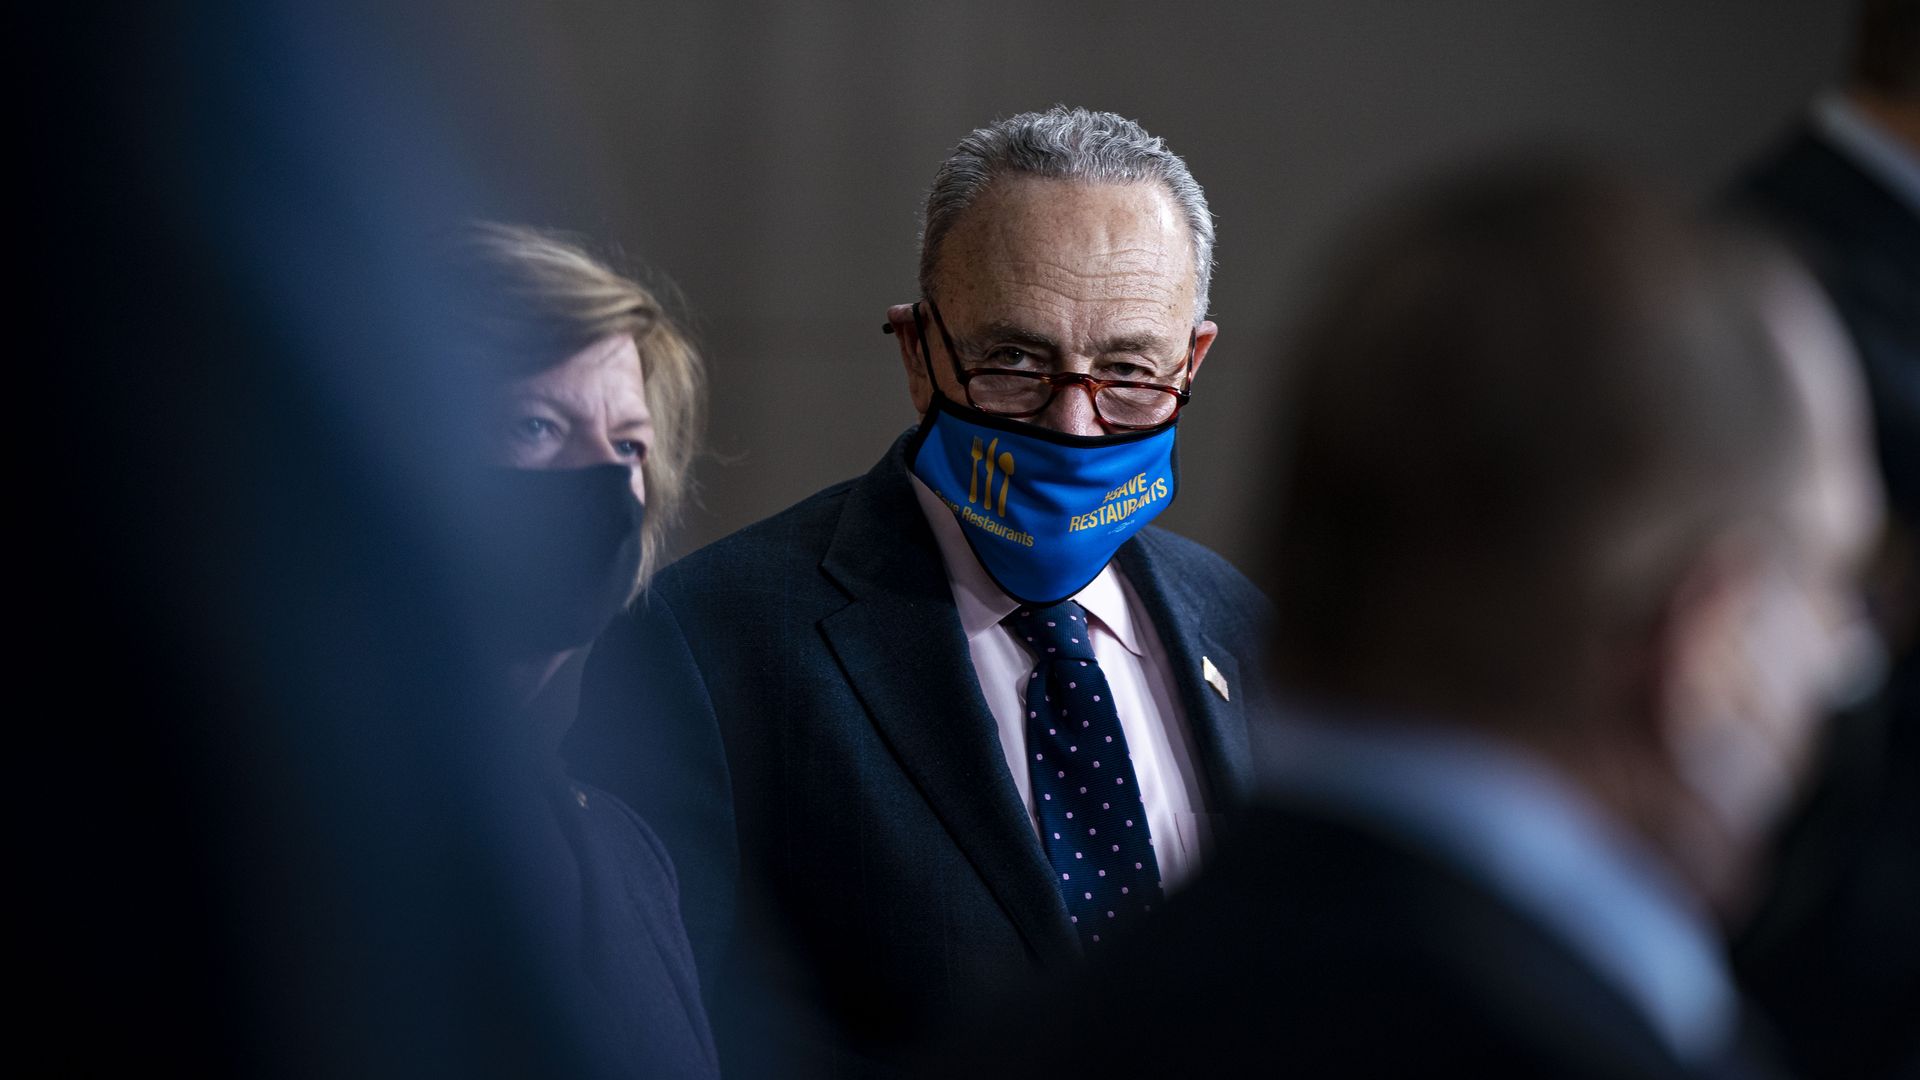 Senate Majority Leader Chuck Schumer is seen during a news conference on Thursday.